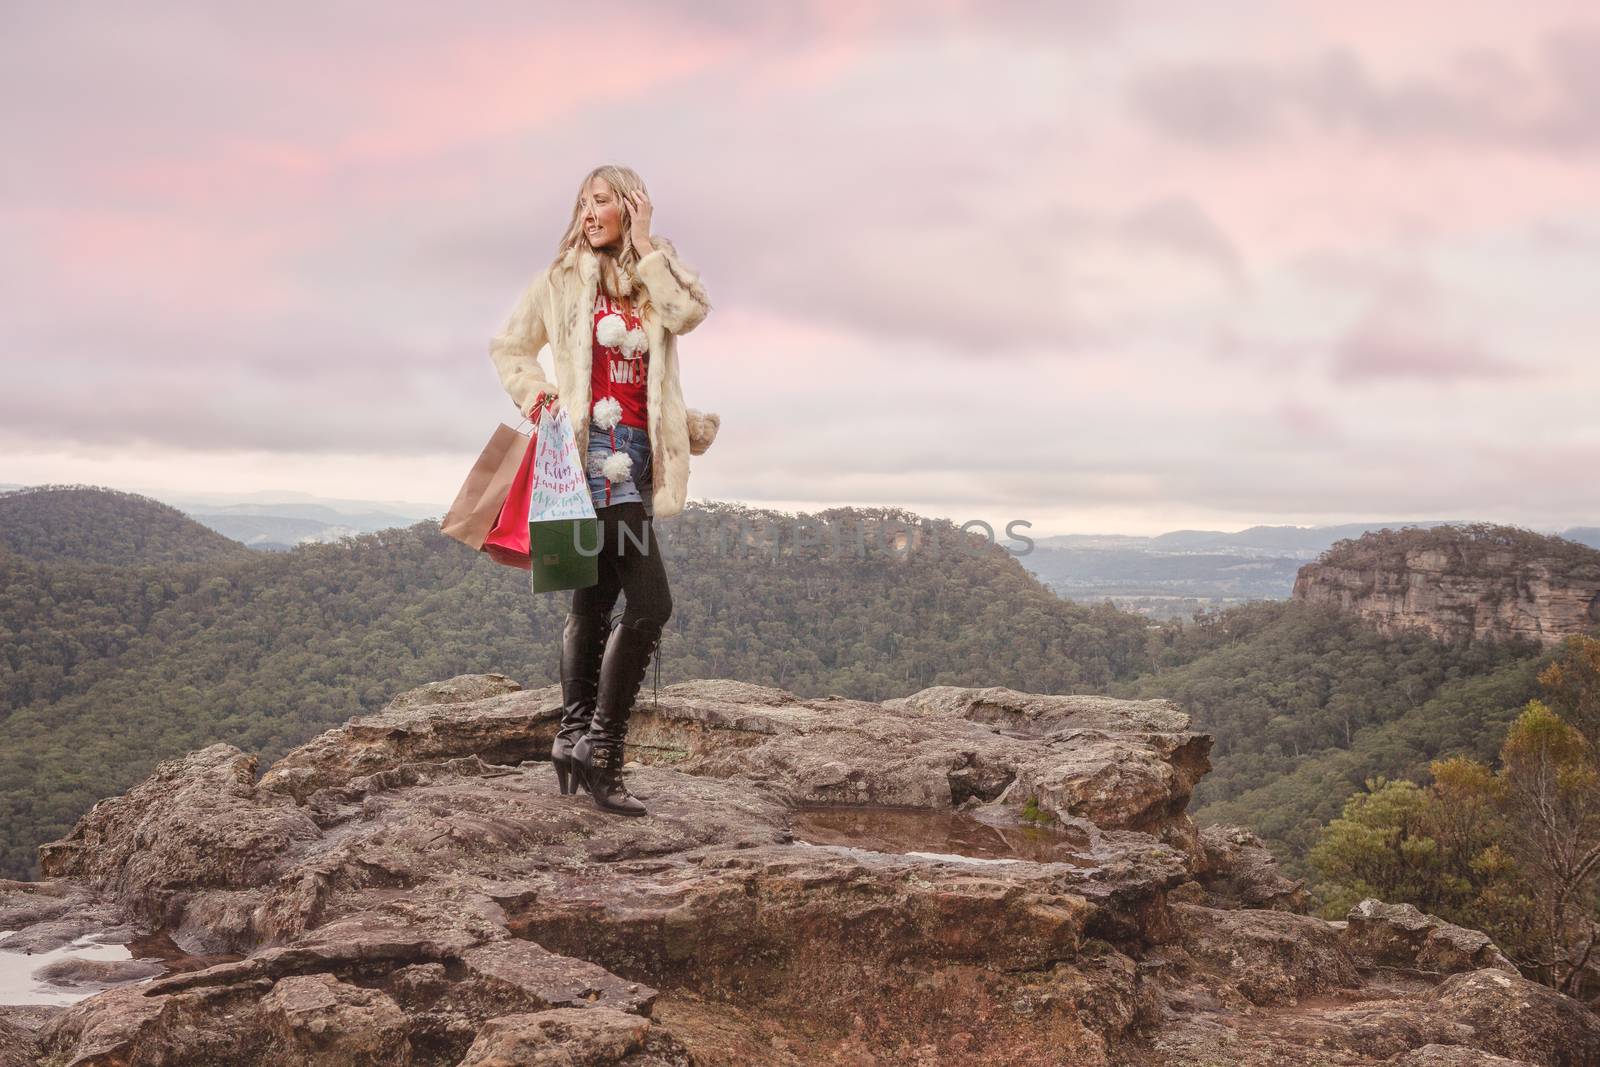 Christmas in July Christmas in Blue Mountains Australia by lovleah